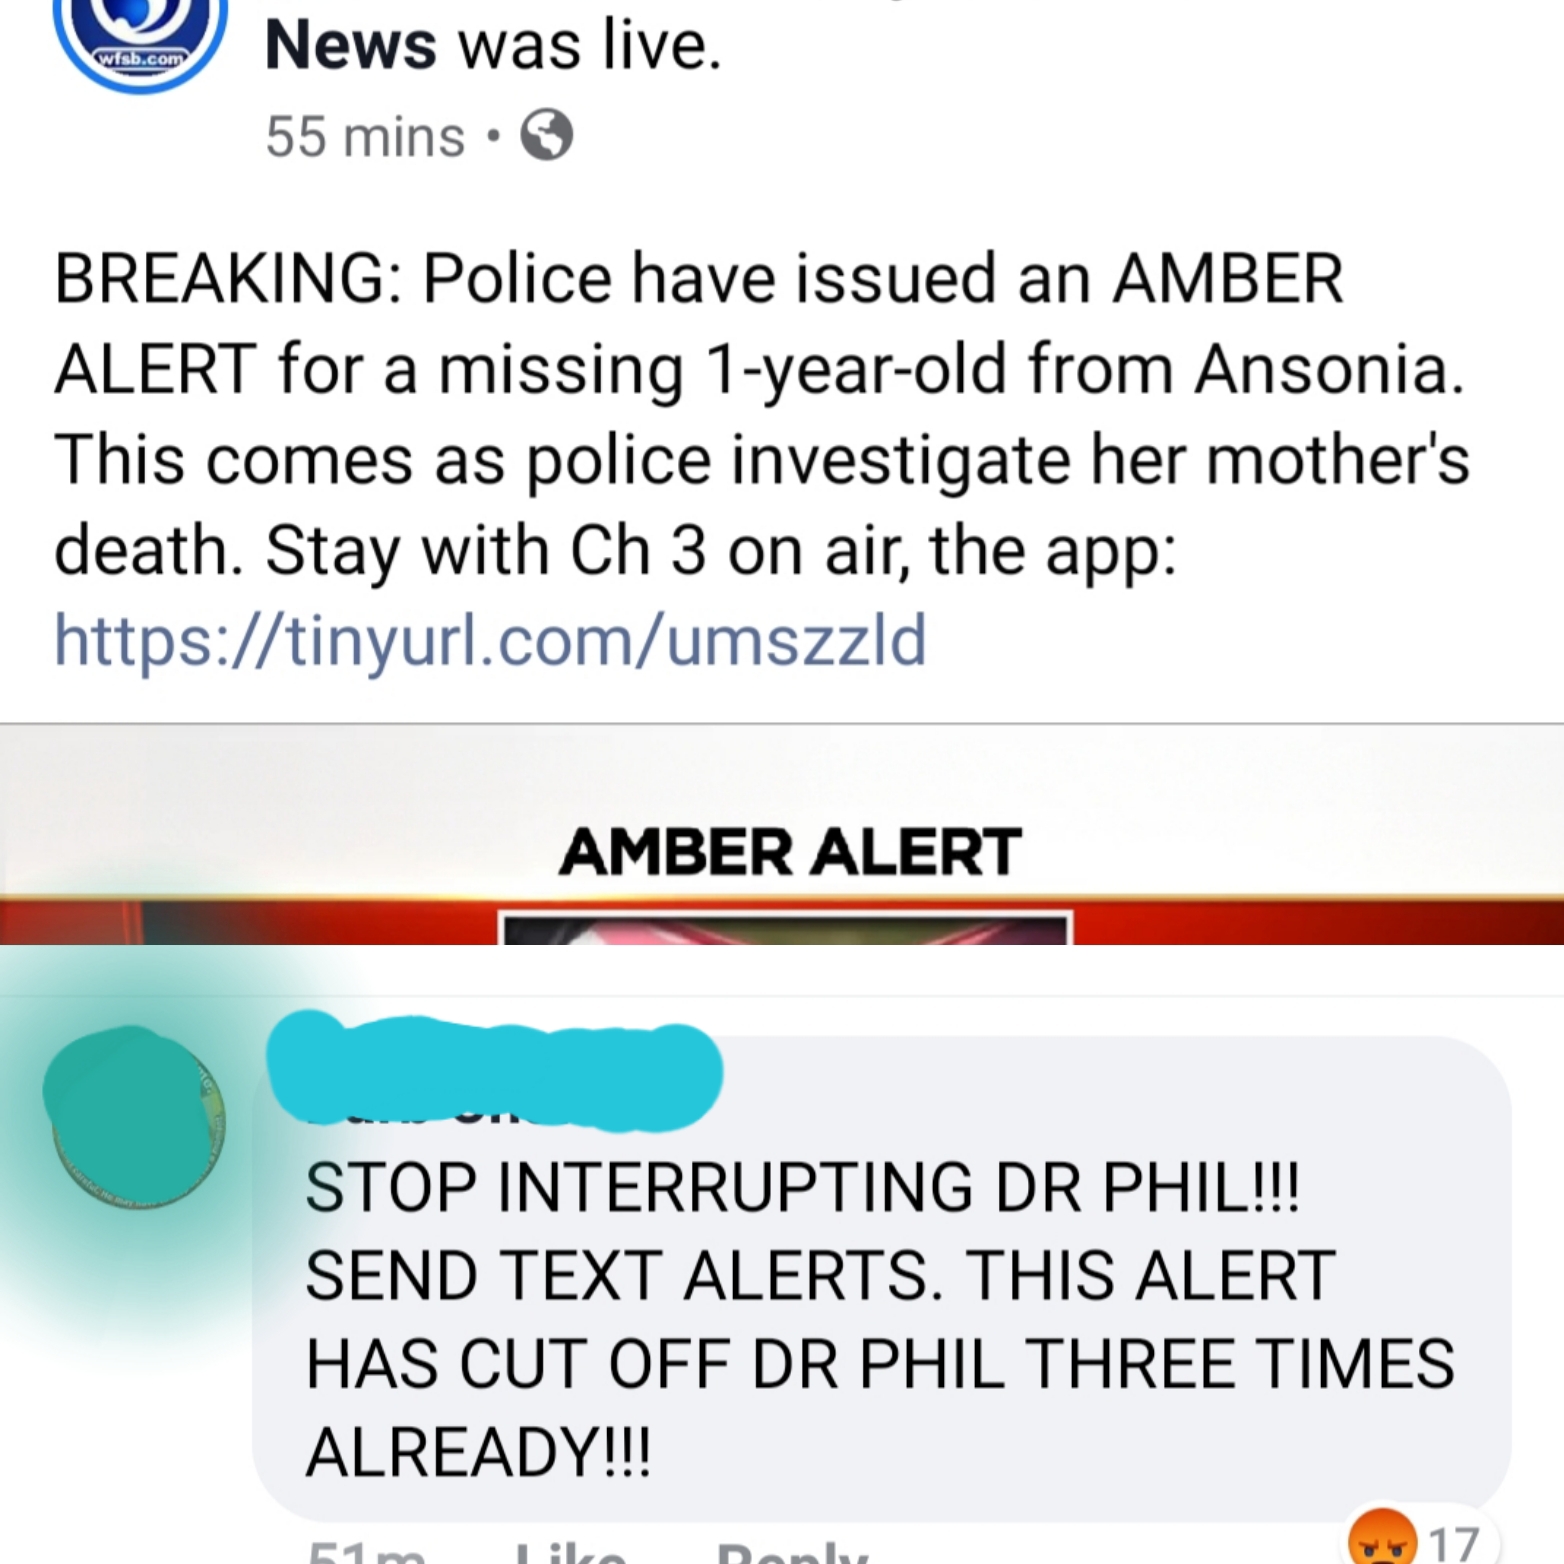 web page - News was live. 55 mins. Breaking Police have issued an Amber Alert for a missing 1yearold from Ansonia. This comes as police investigate her mother's death. Stay with Ch 3 on air, the app Amber Alert Stop Interrupting Dr Phil!!! Send Text Alert